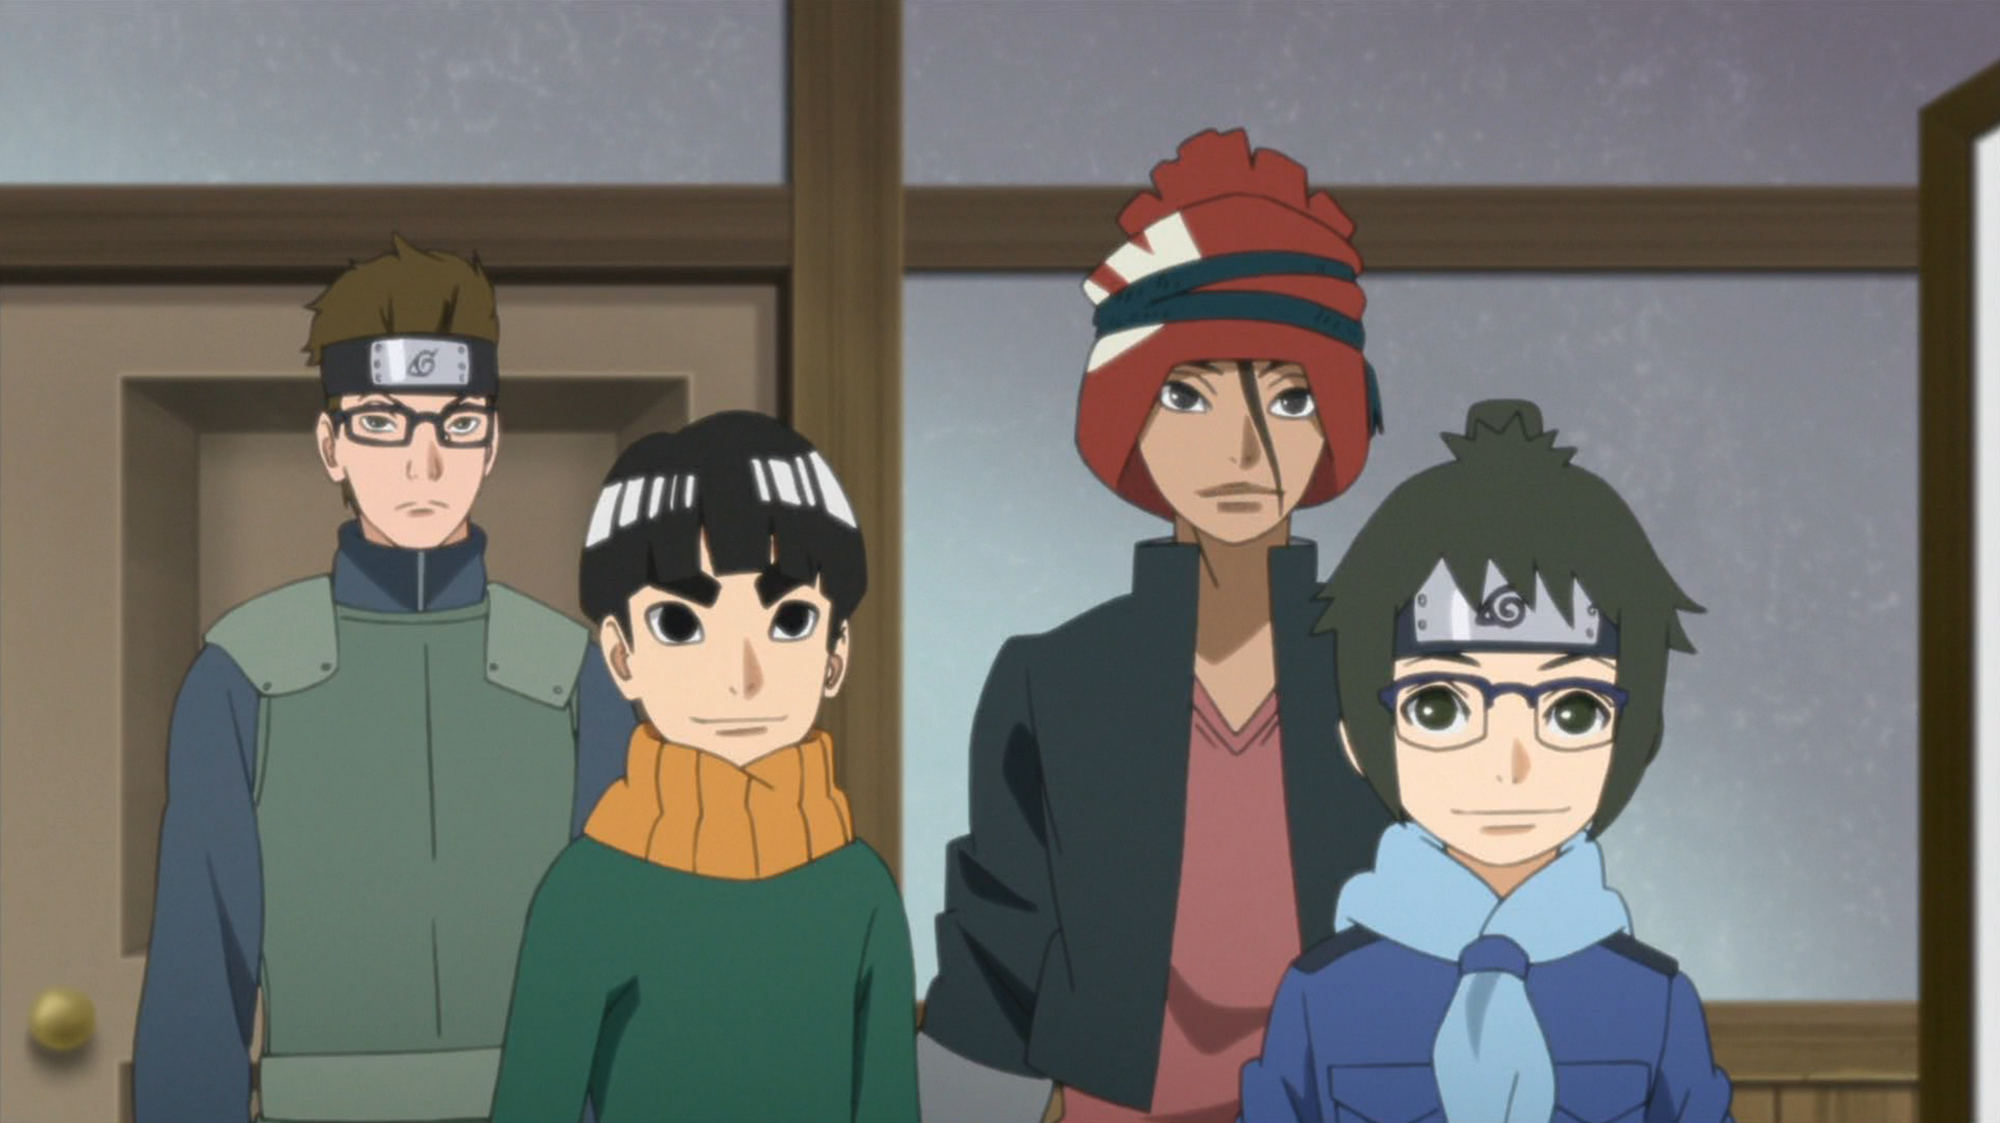 Team 5 is a shinobi team from Konohagakure, which is led by Udon Ise. 